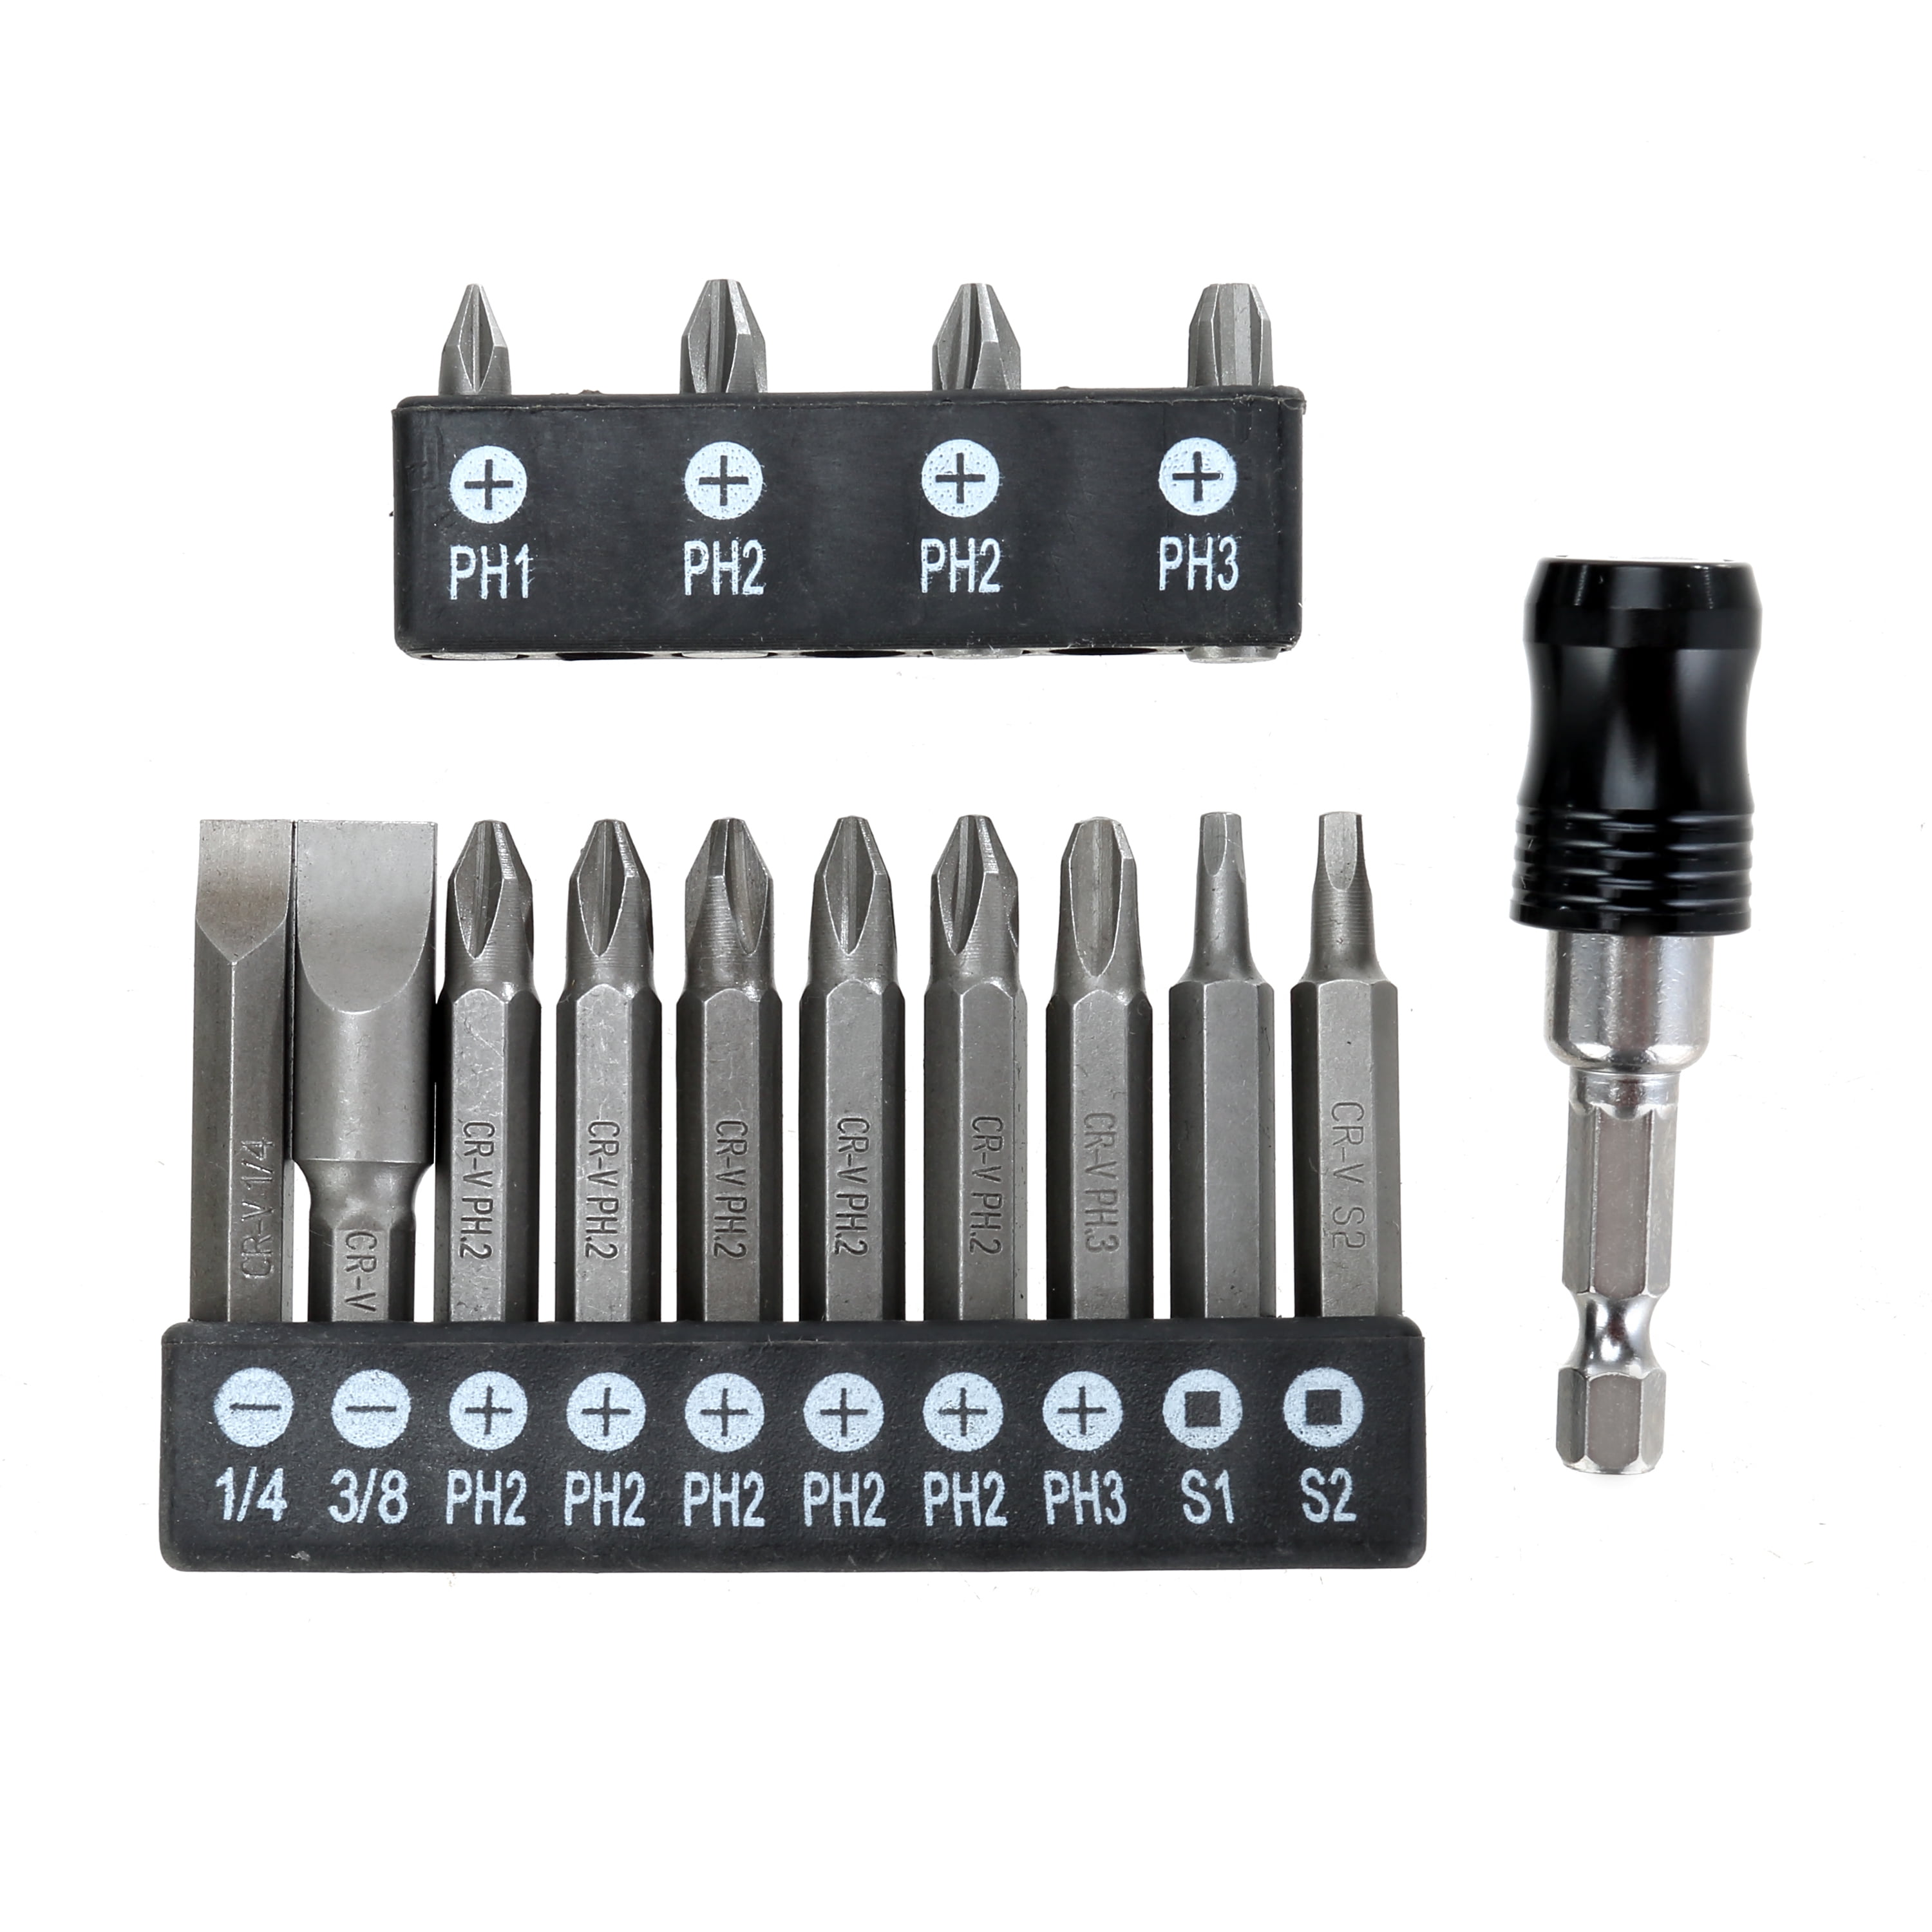 10x CR-V PH2 DRYWALL SCREWDRIVER BITS Steel Magnetic Corrosion Resistant Inserts 